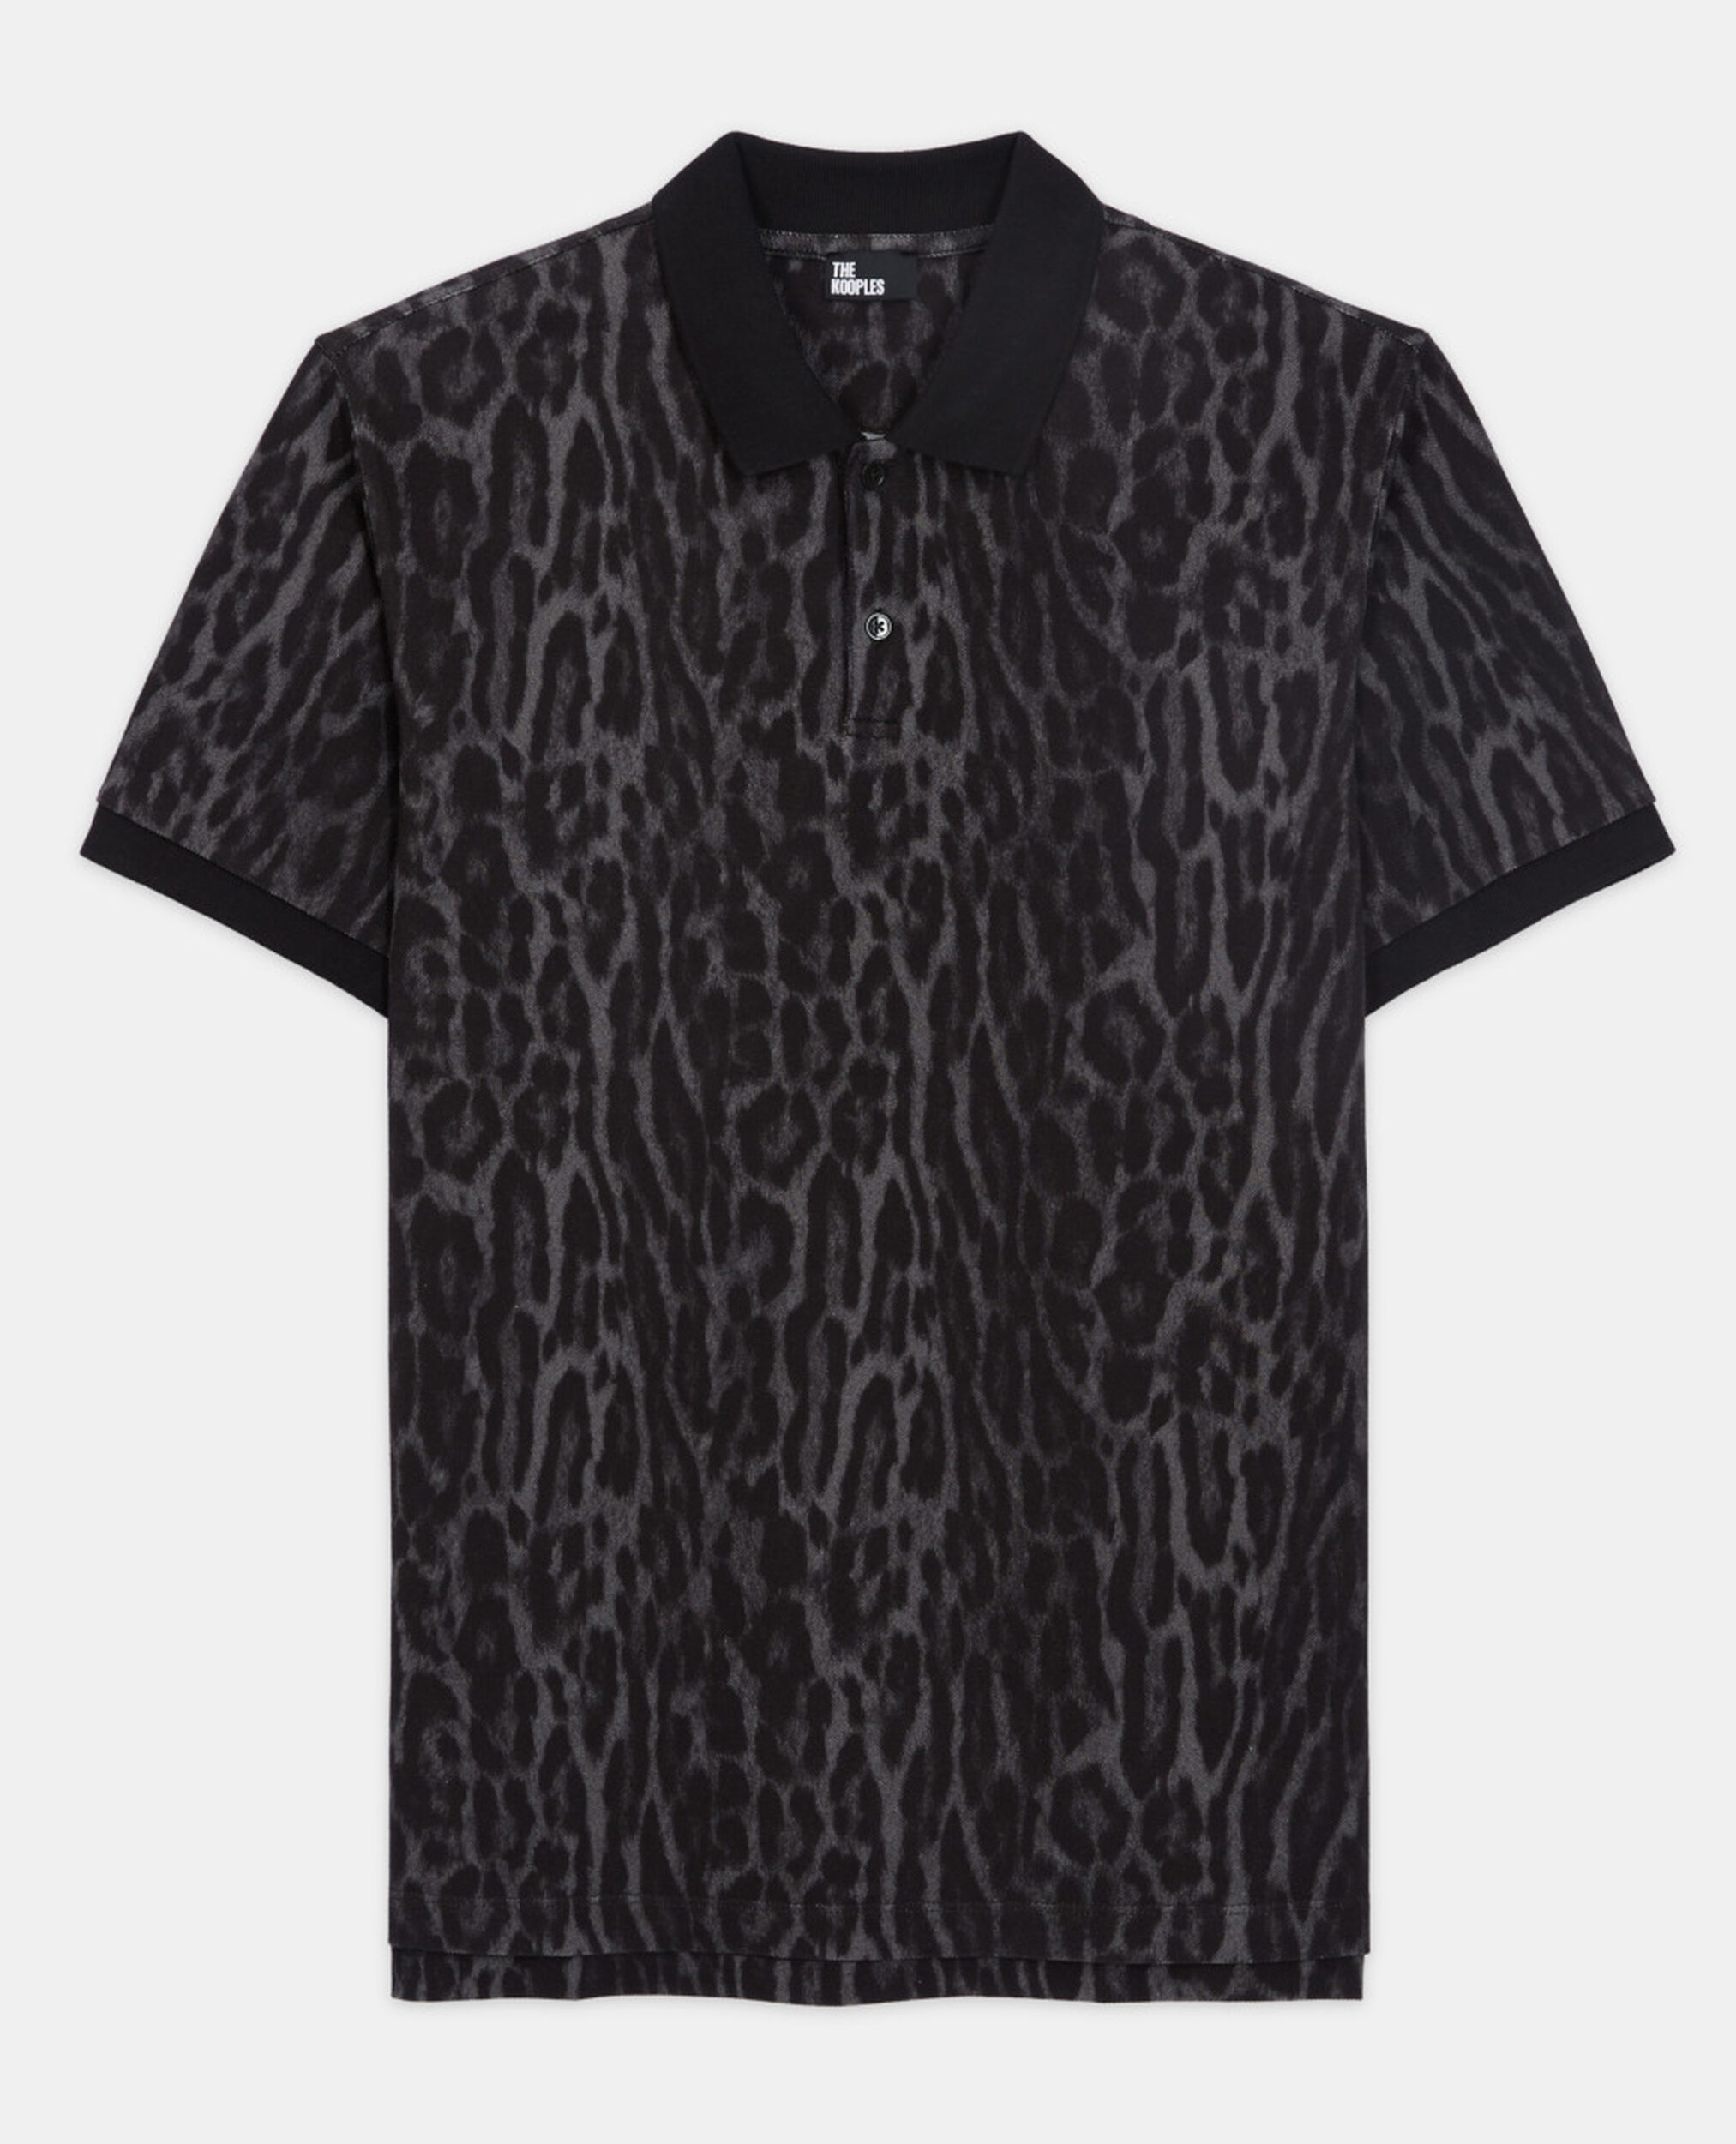 Klassisches Poloshirt mit Leopardenmuster, BLACK, hi-res image number null